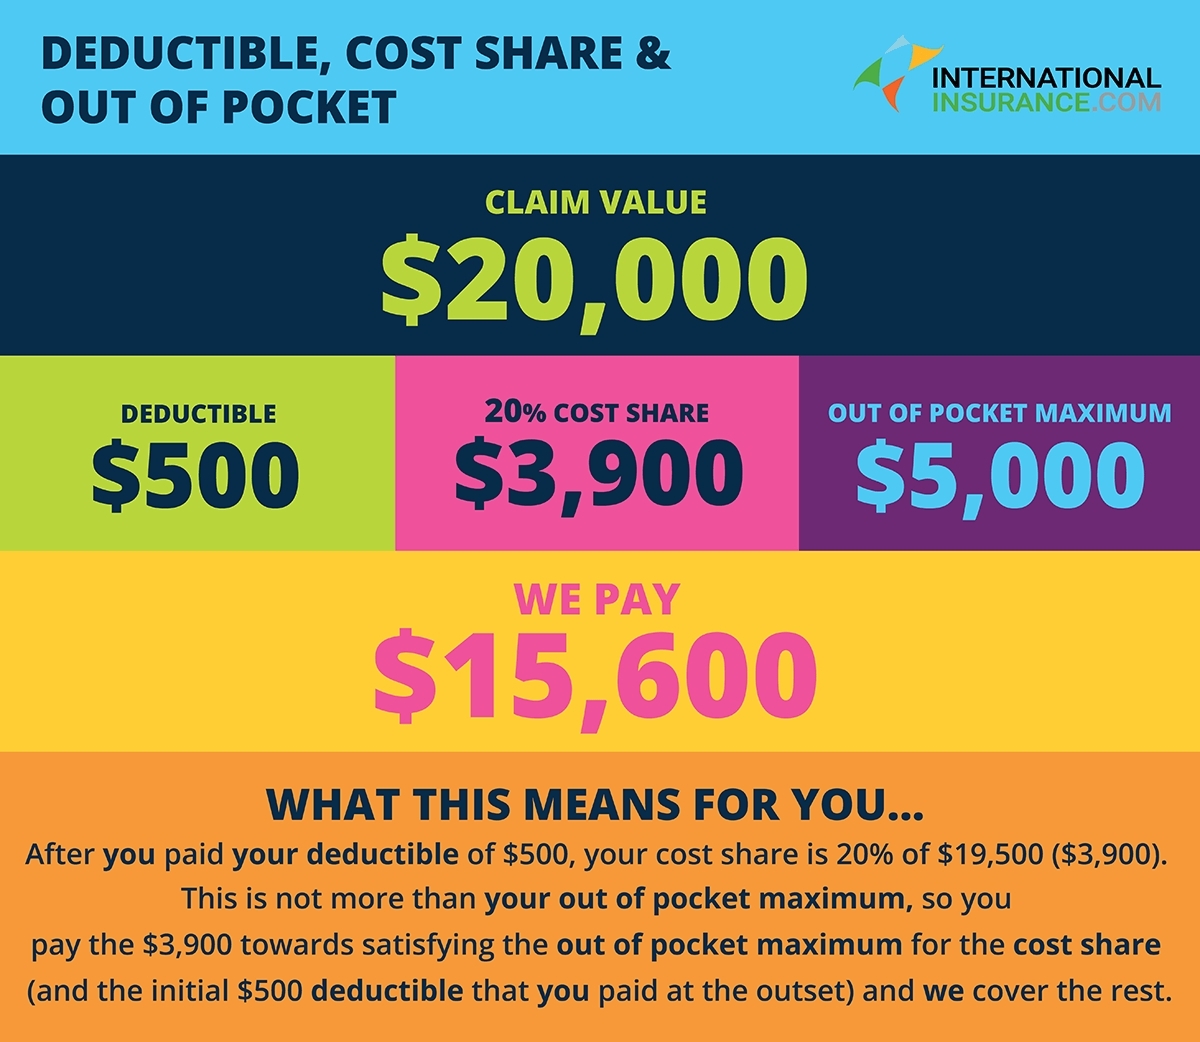 Calendar Year Deductible And Out Of Pocket Maximum | Month